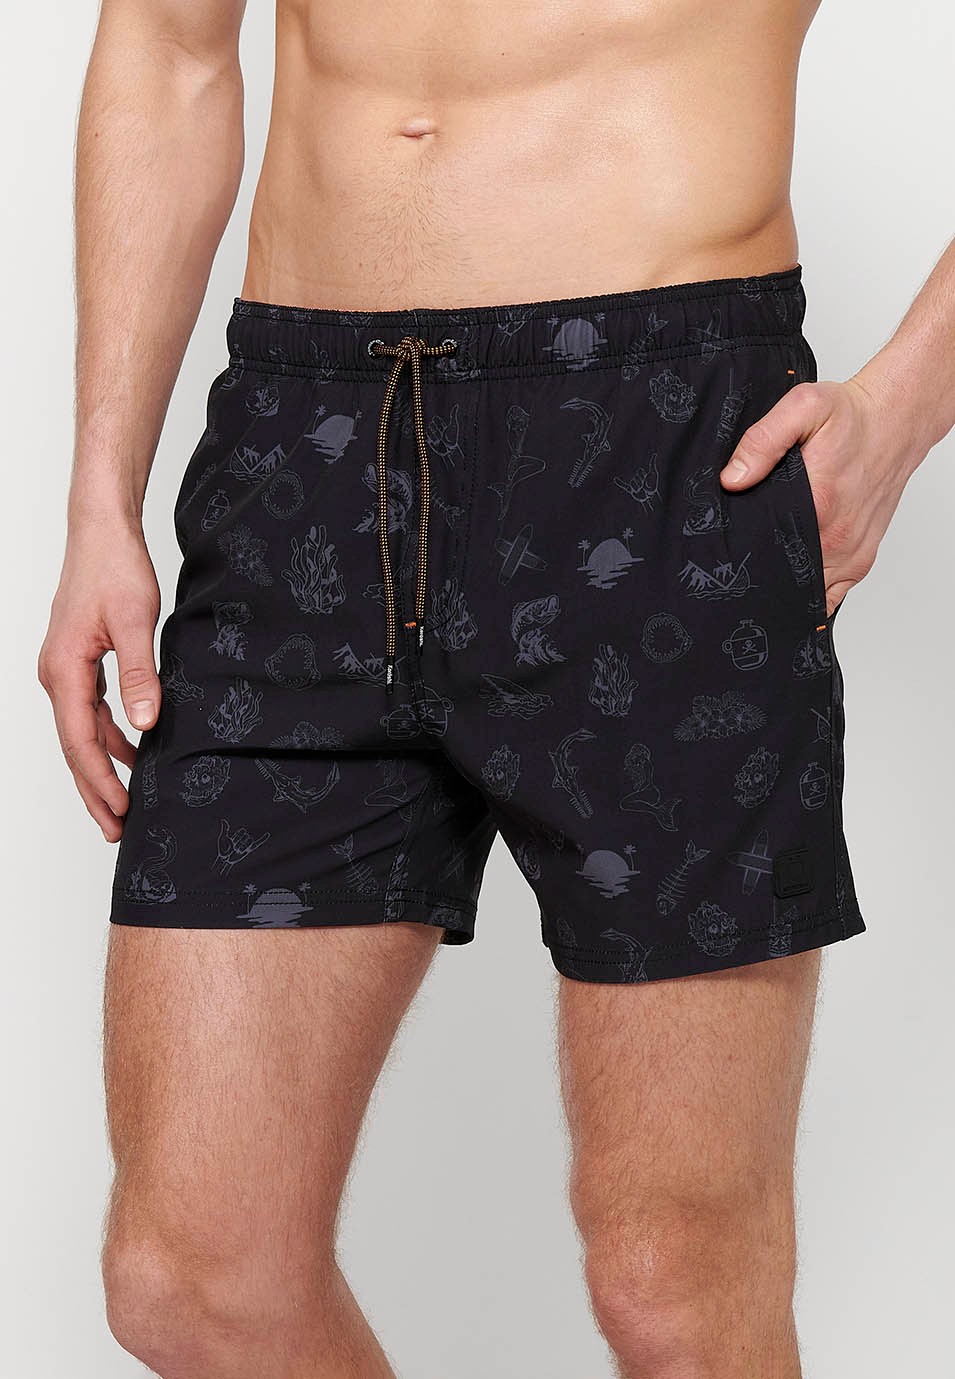 Printed short swimsuit with adjustable waist with drawstring and back pocket and an inner gray color for men 3